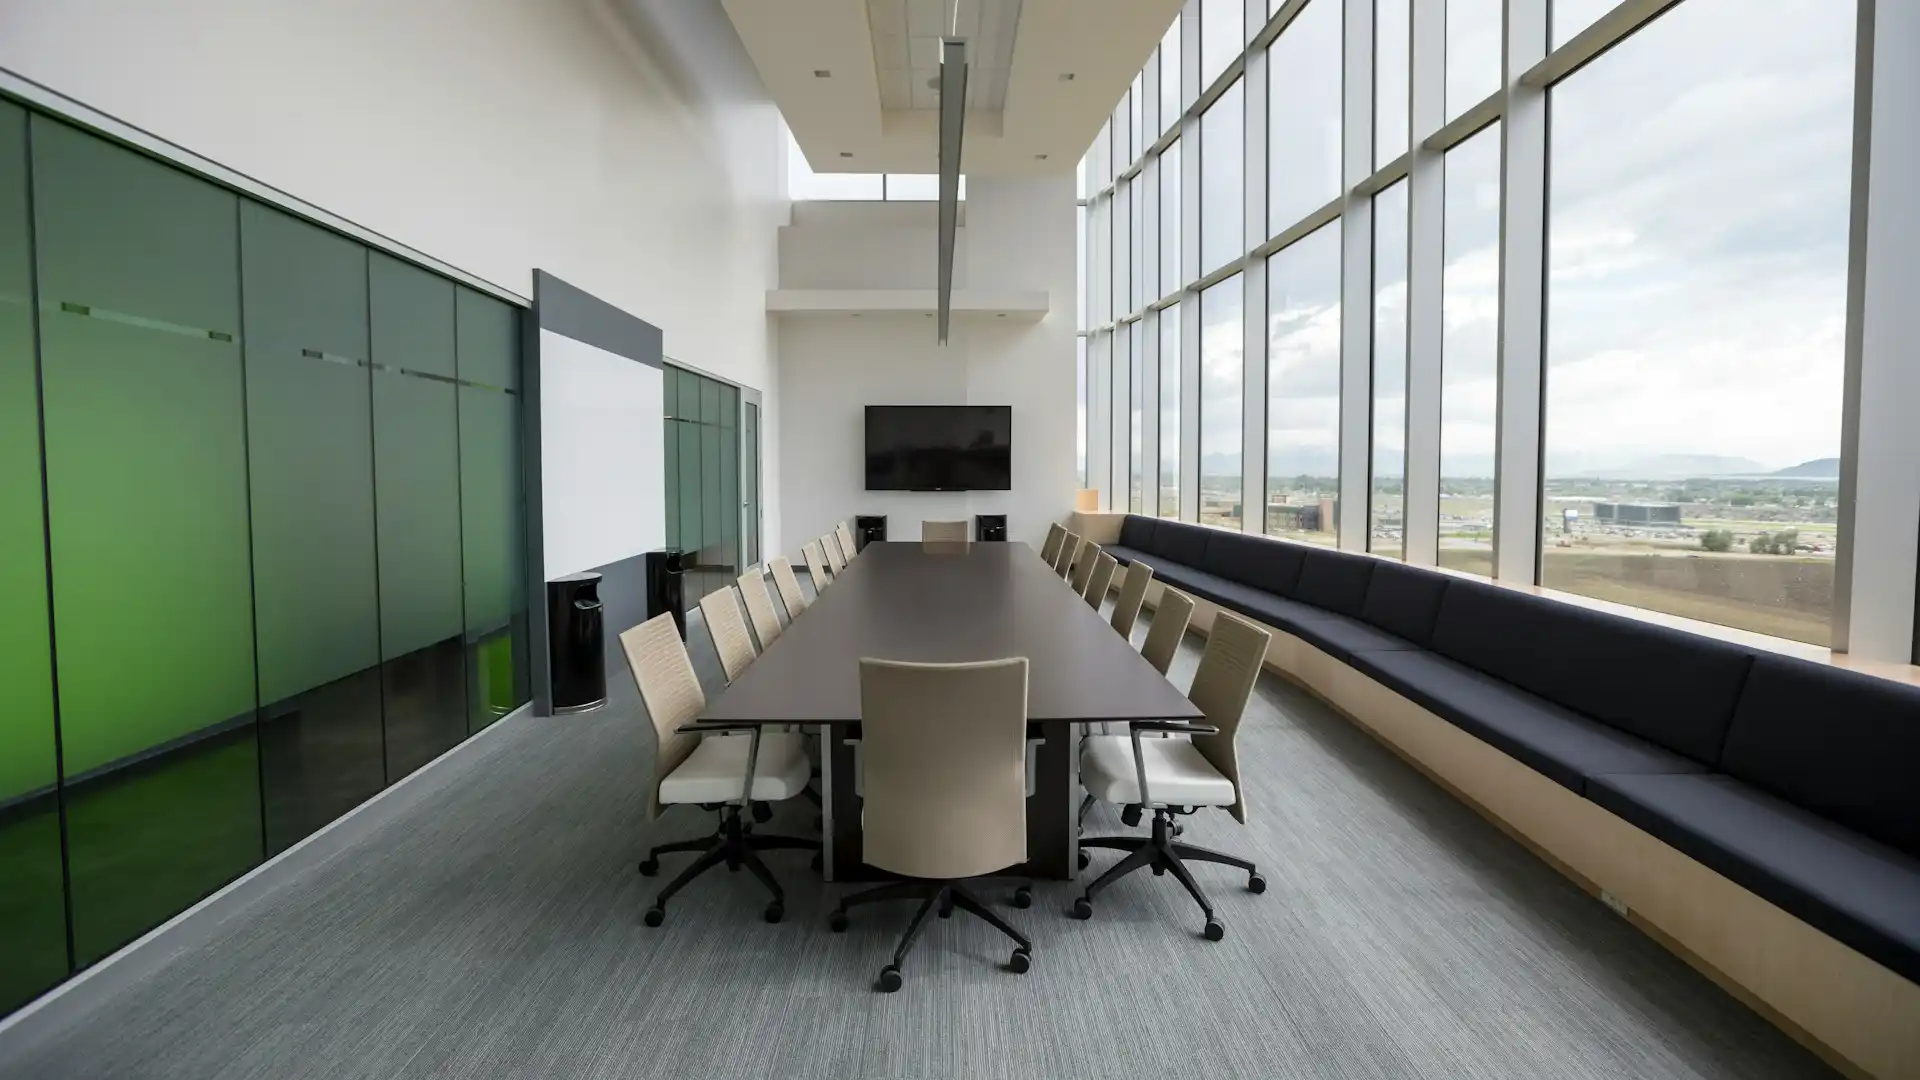 A long table in an office space with efficient lighting overhead